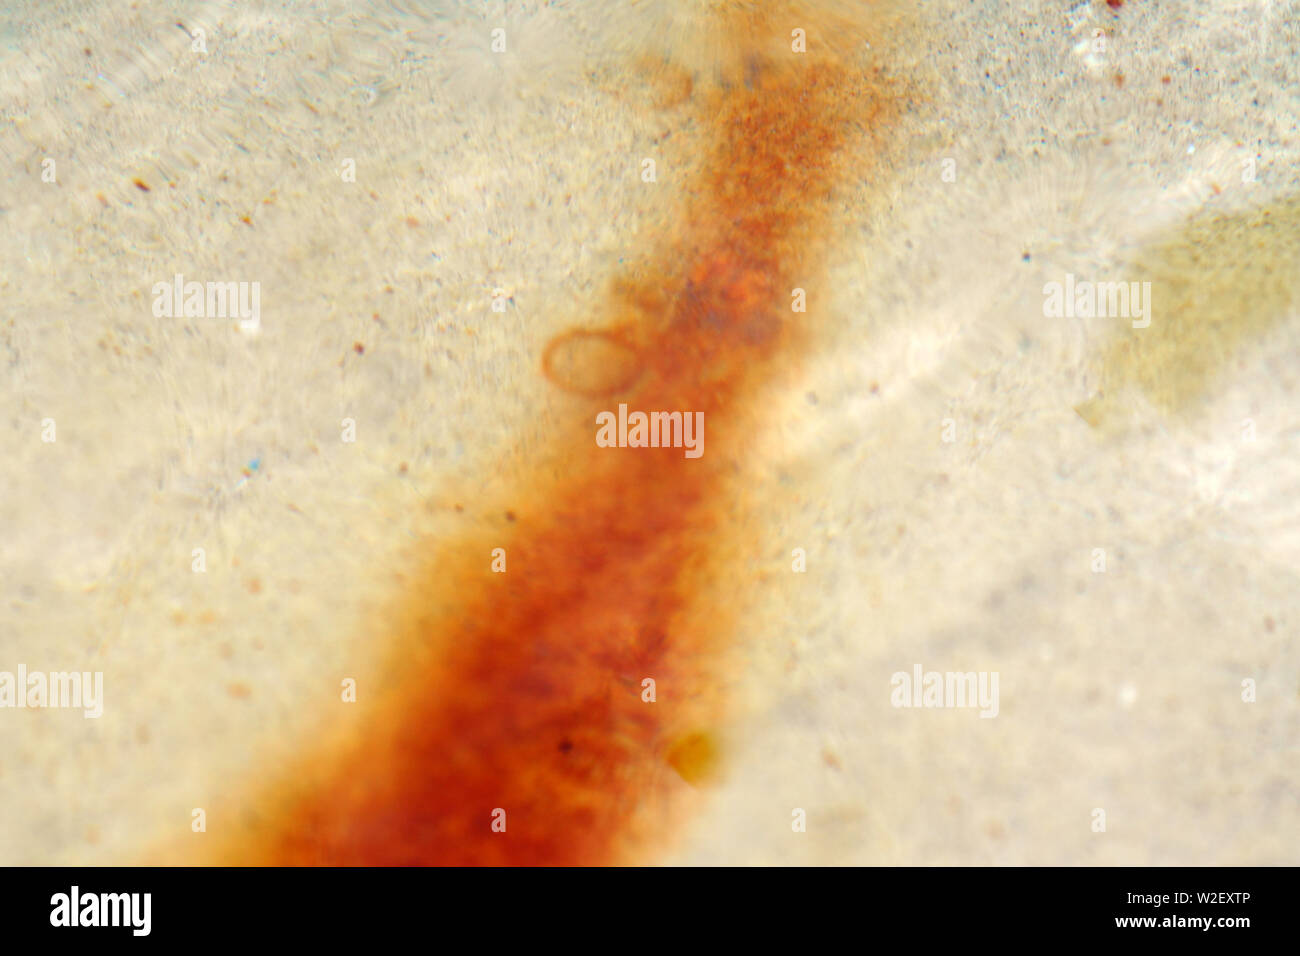 The close-up of the surface of a water basin with traces of rust and ferrous deposits. Stock Photo